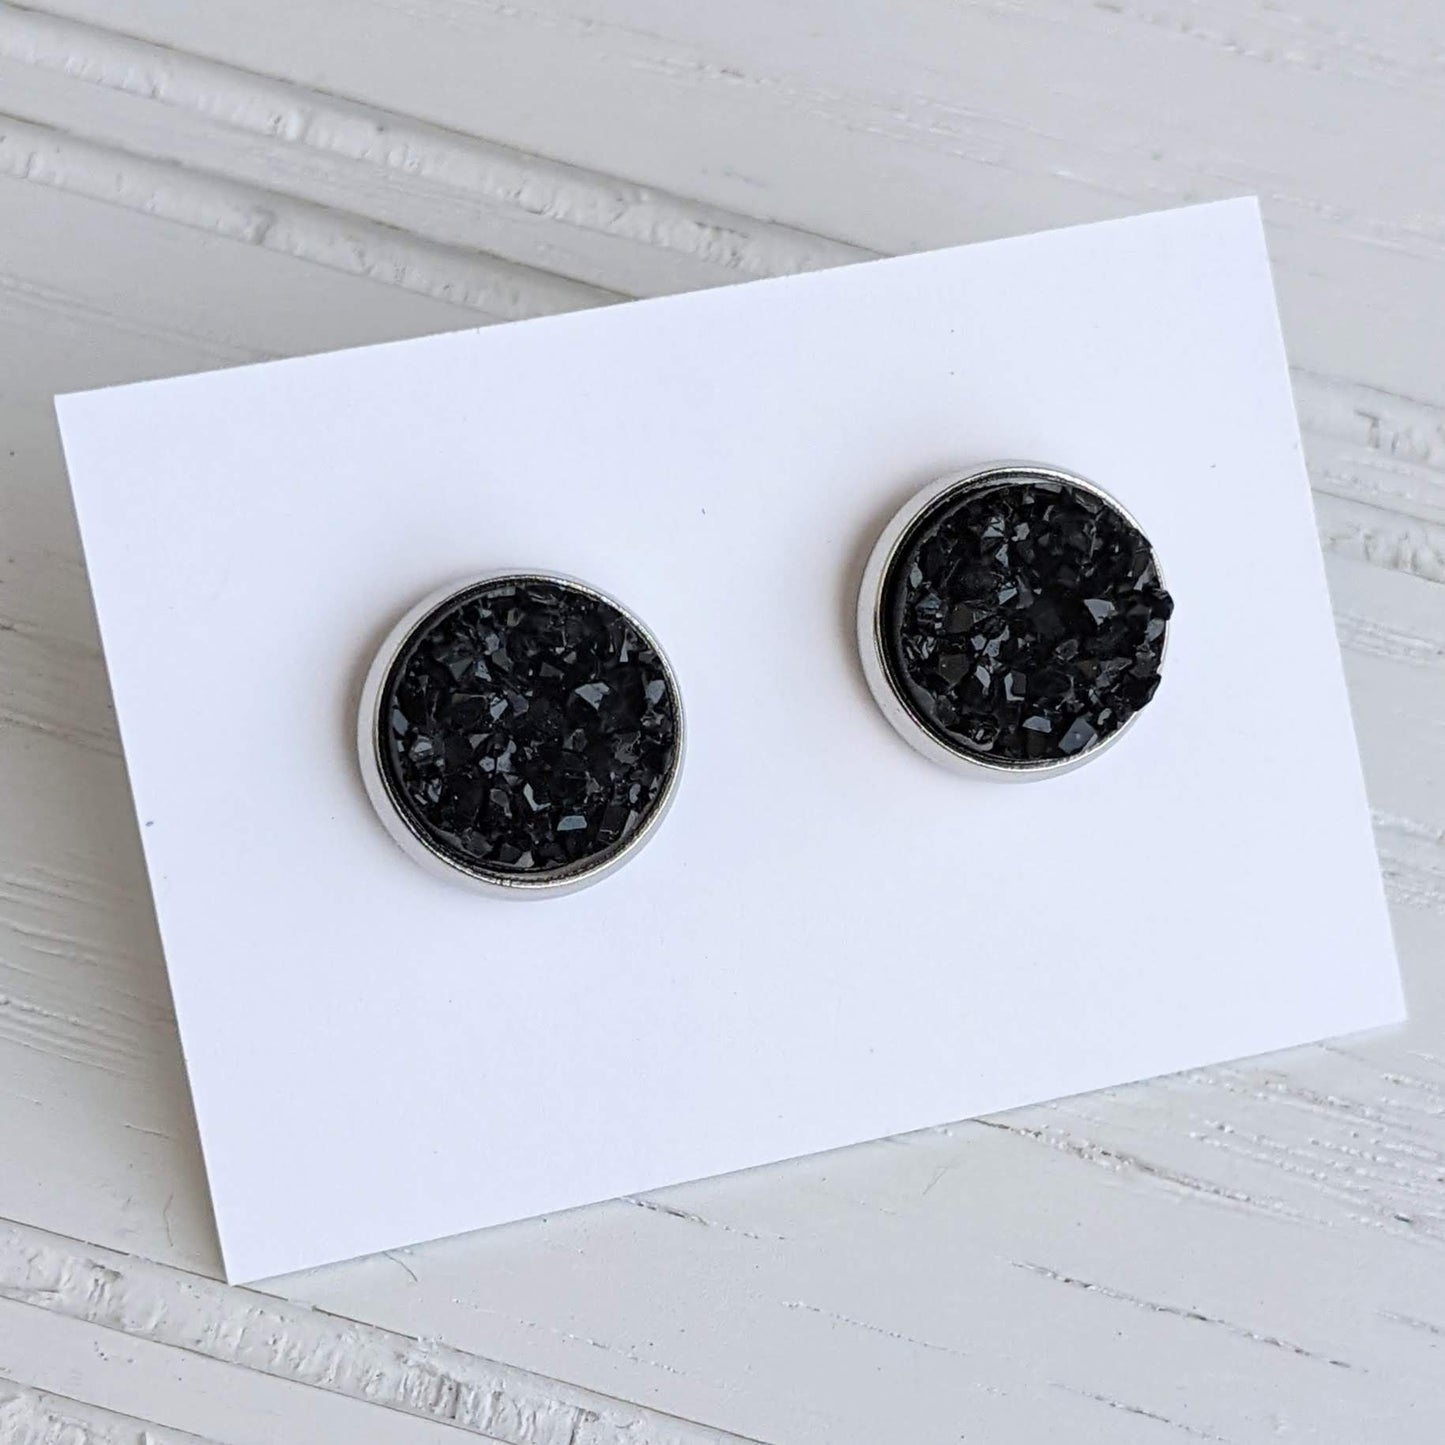 Sparkly Spring Druzy Earrings on Stainless Steel